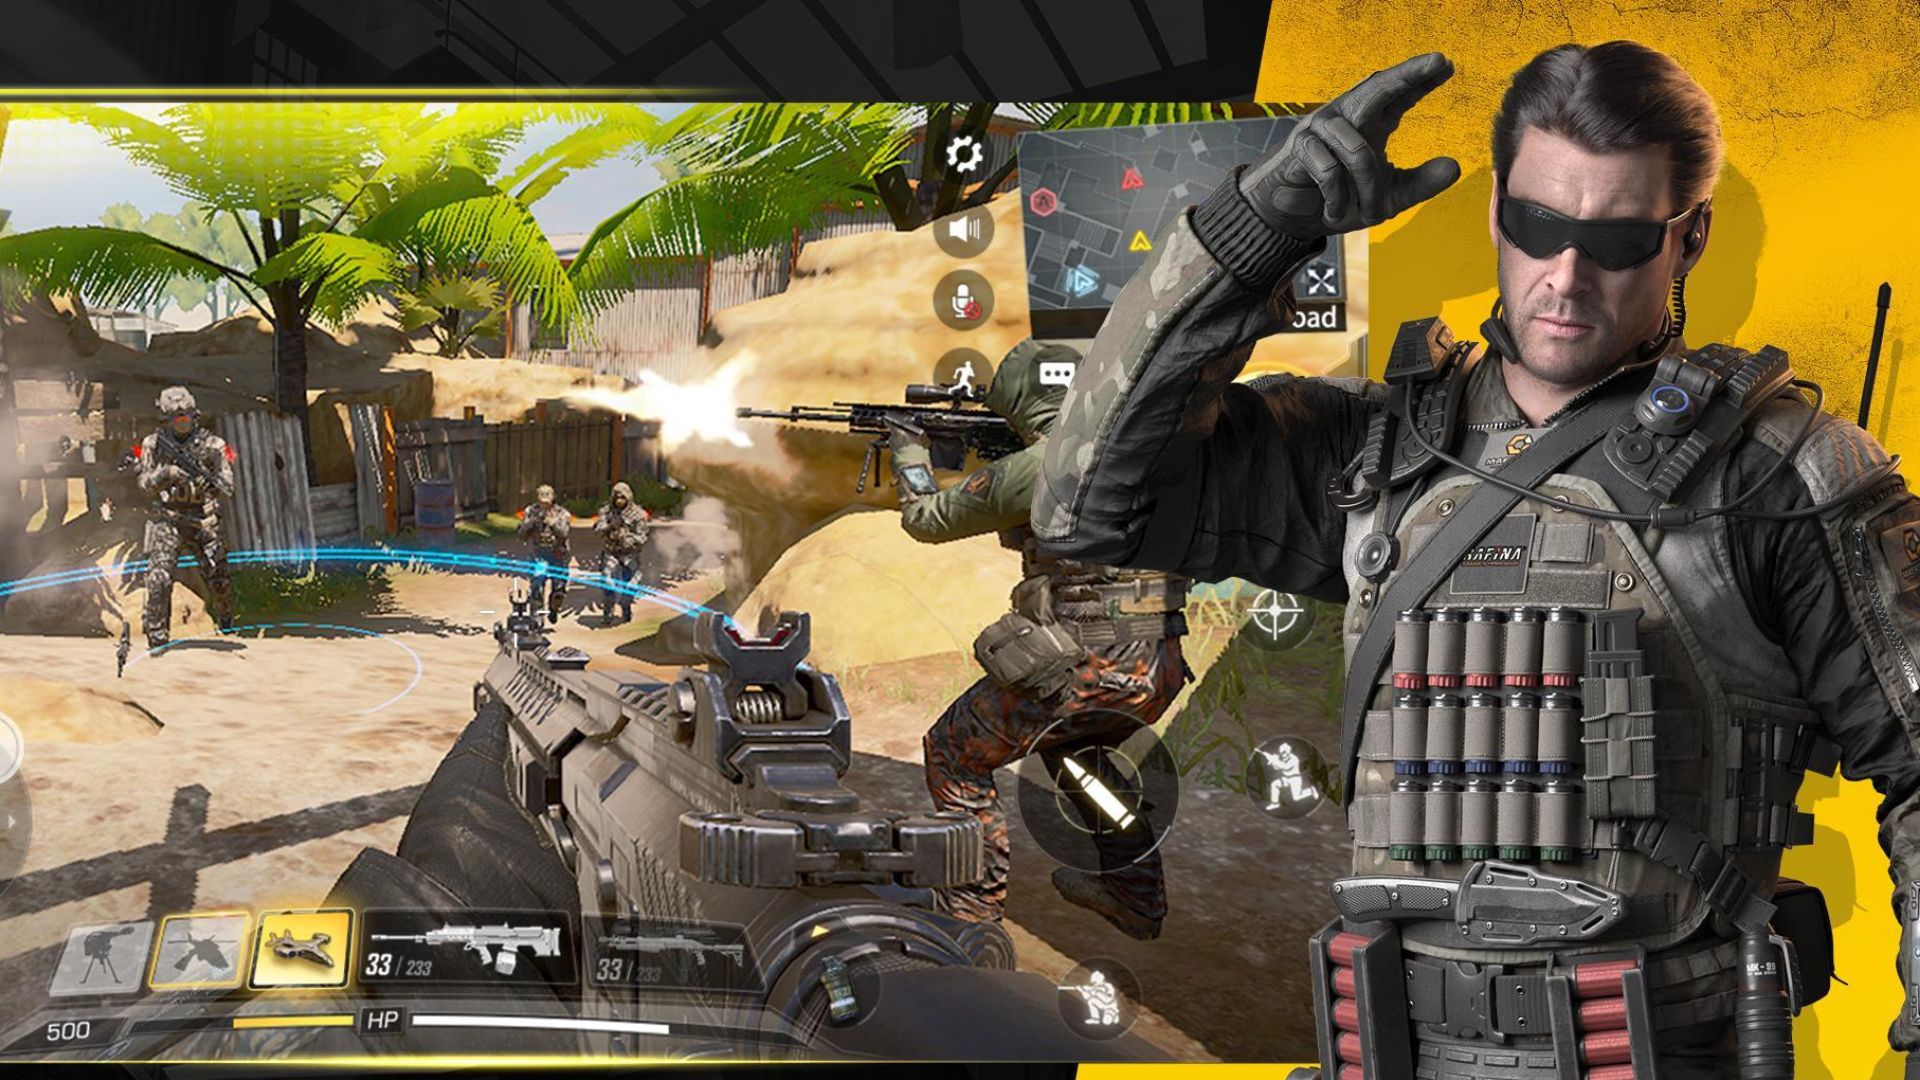 FPS games - a man stands saluting in modern soldier armour next to a screenshot from Cod Mobile showing a first person view of a man holding an assault rifle.